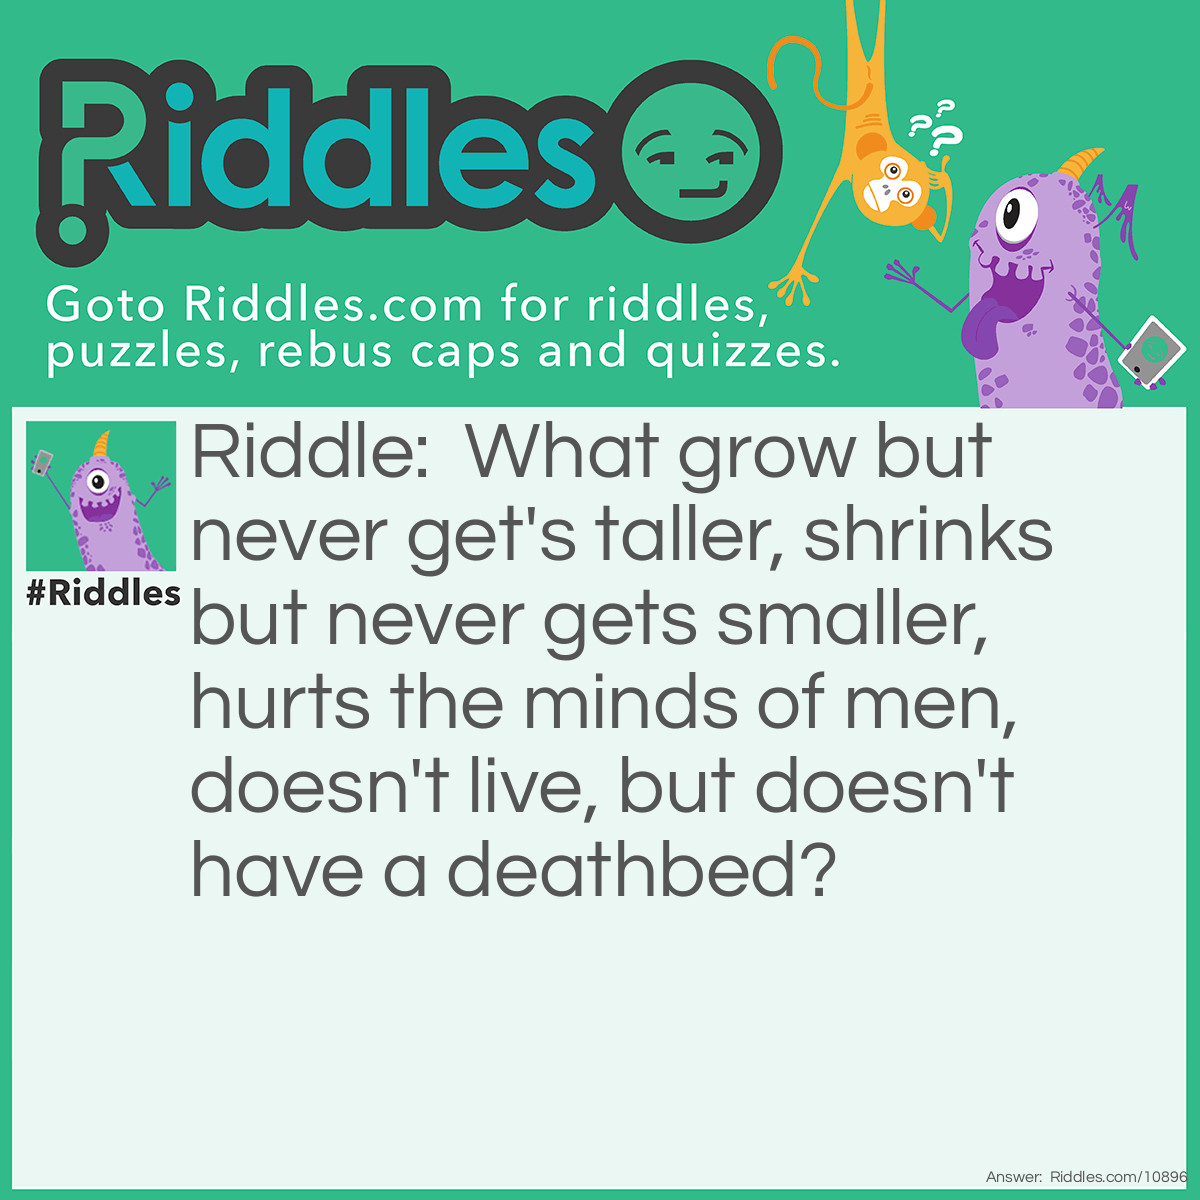 Riddle: What grows but never gets taller, shrinks but never gets smaller, hurts the minds of men, doesn't live, but doesn't have a deathbed? Answer: Sound.